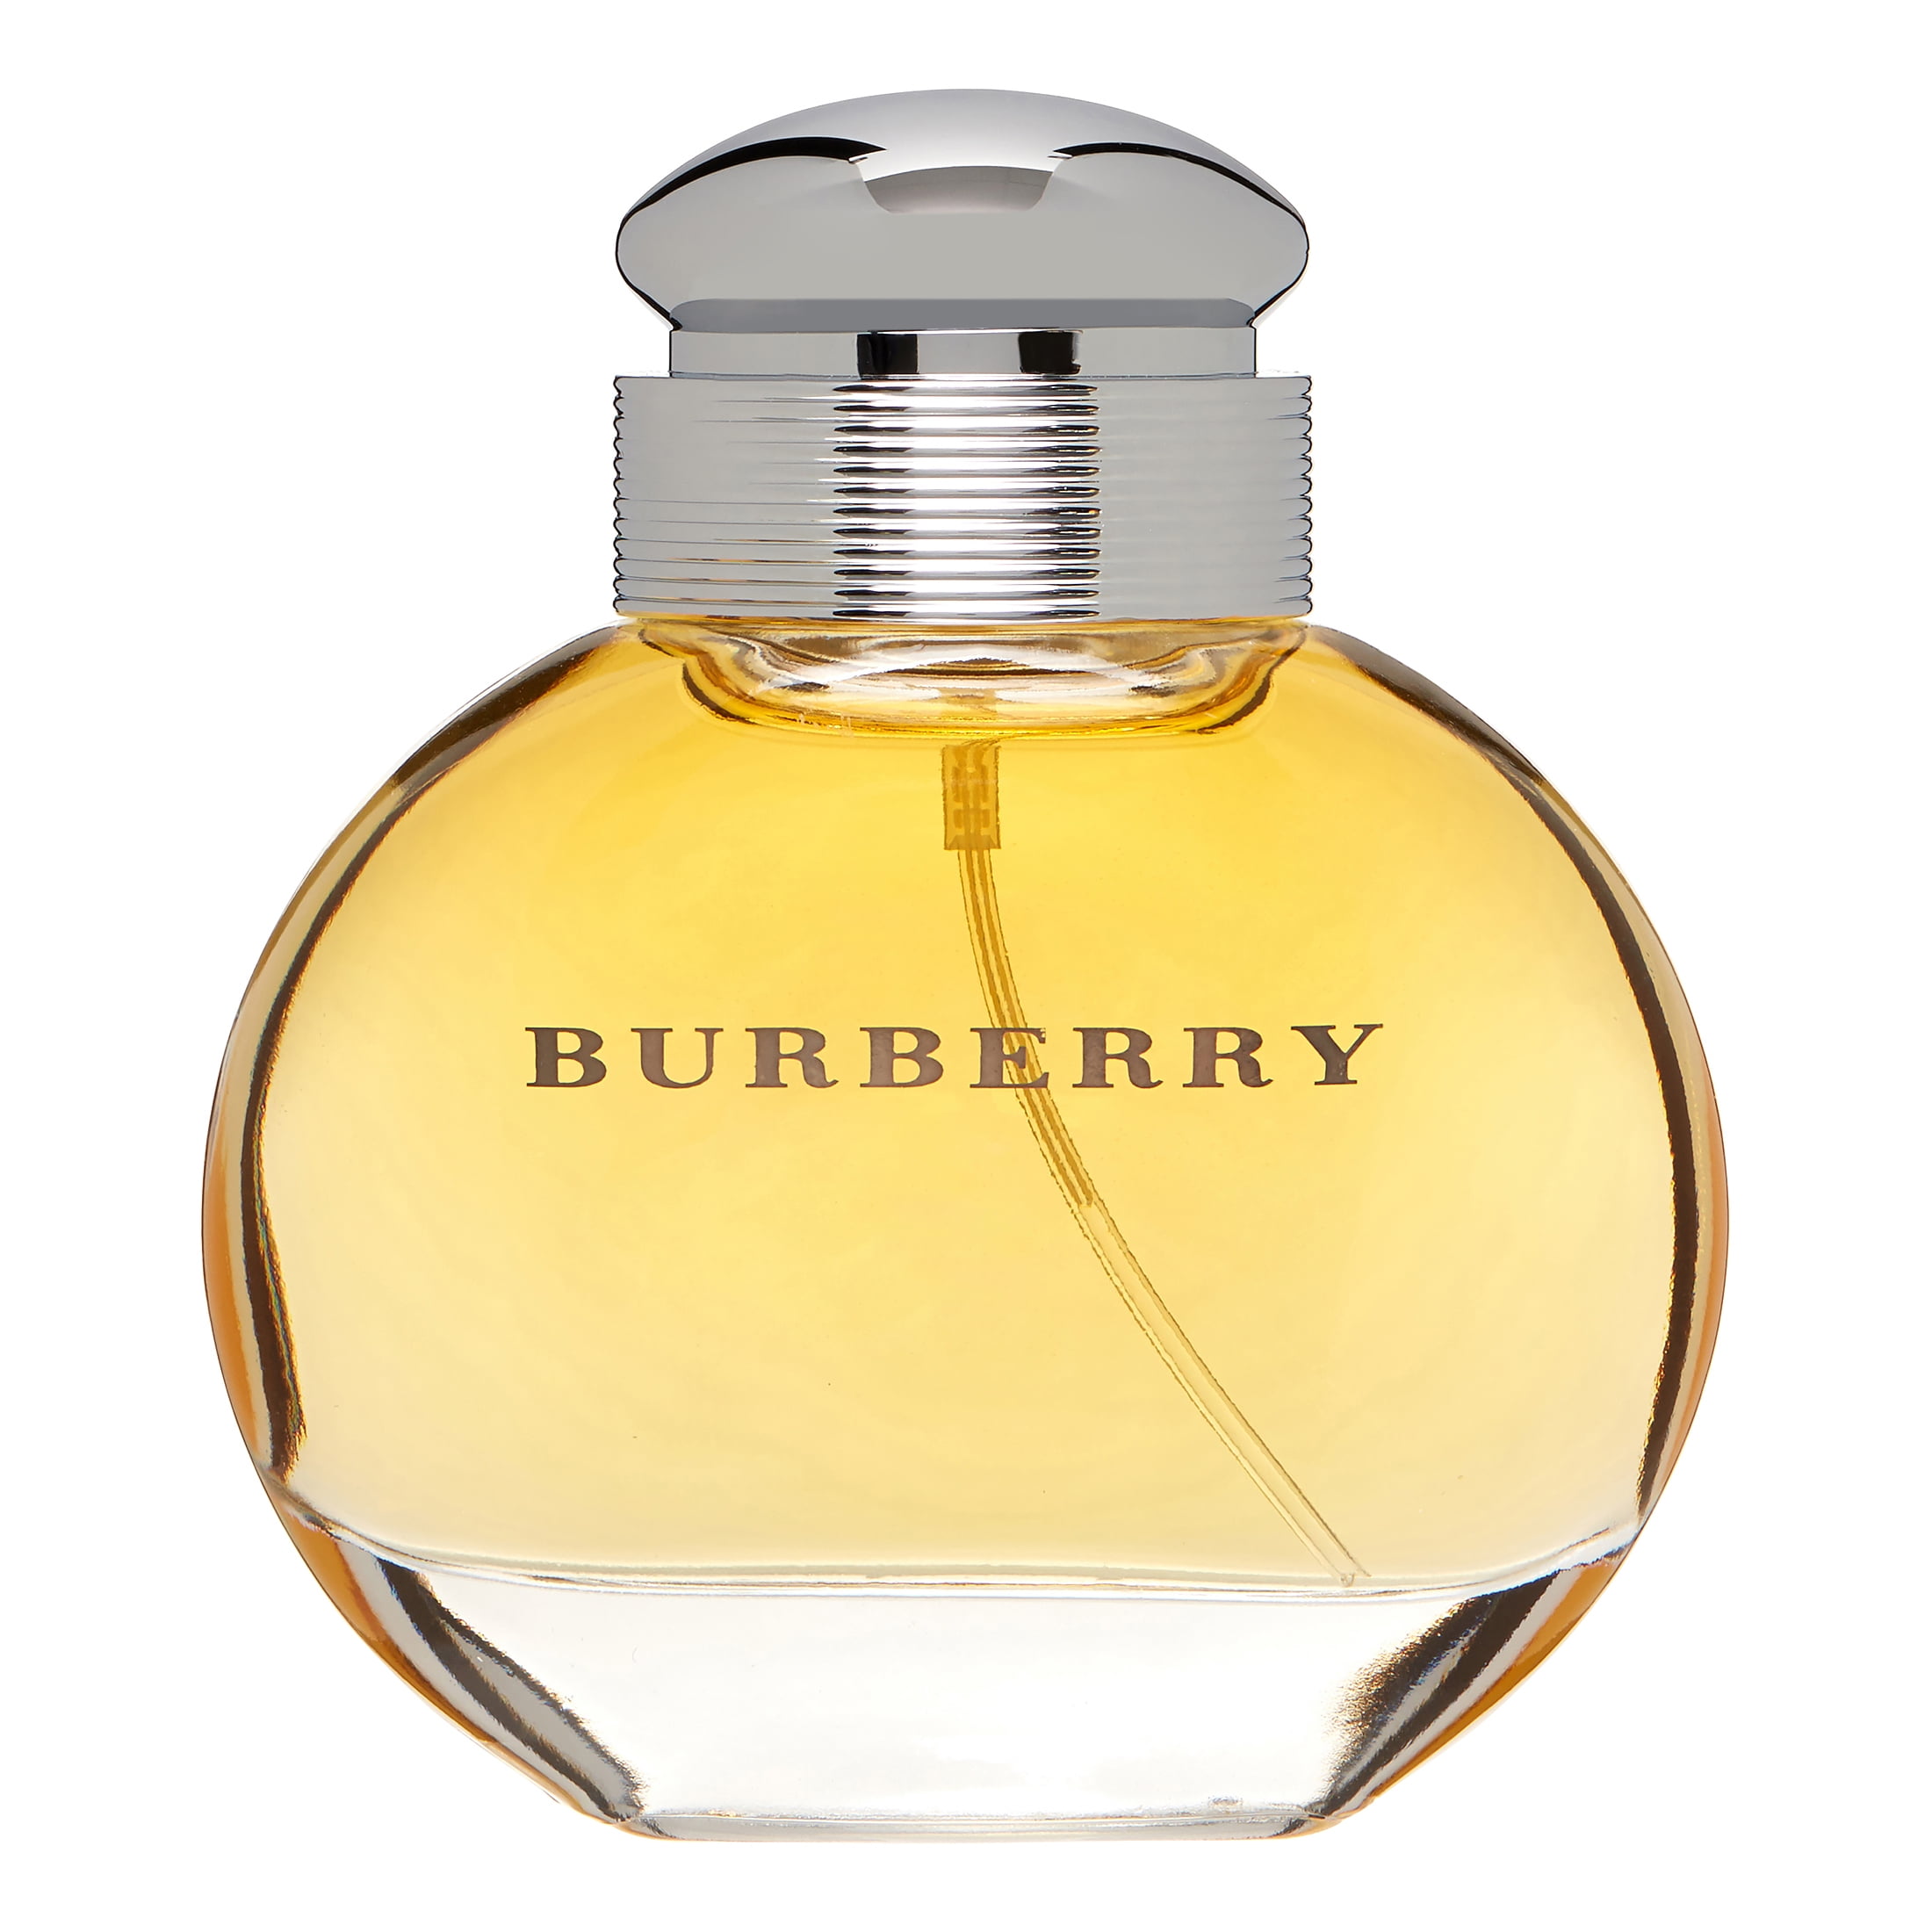 burberry classic cologne